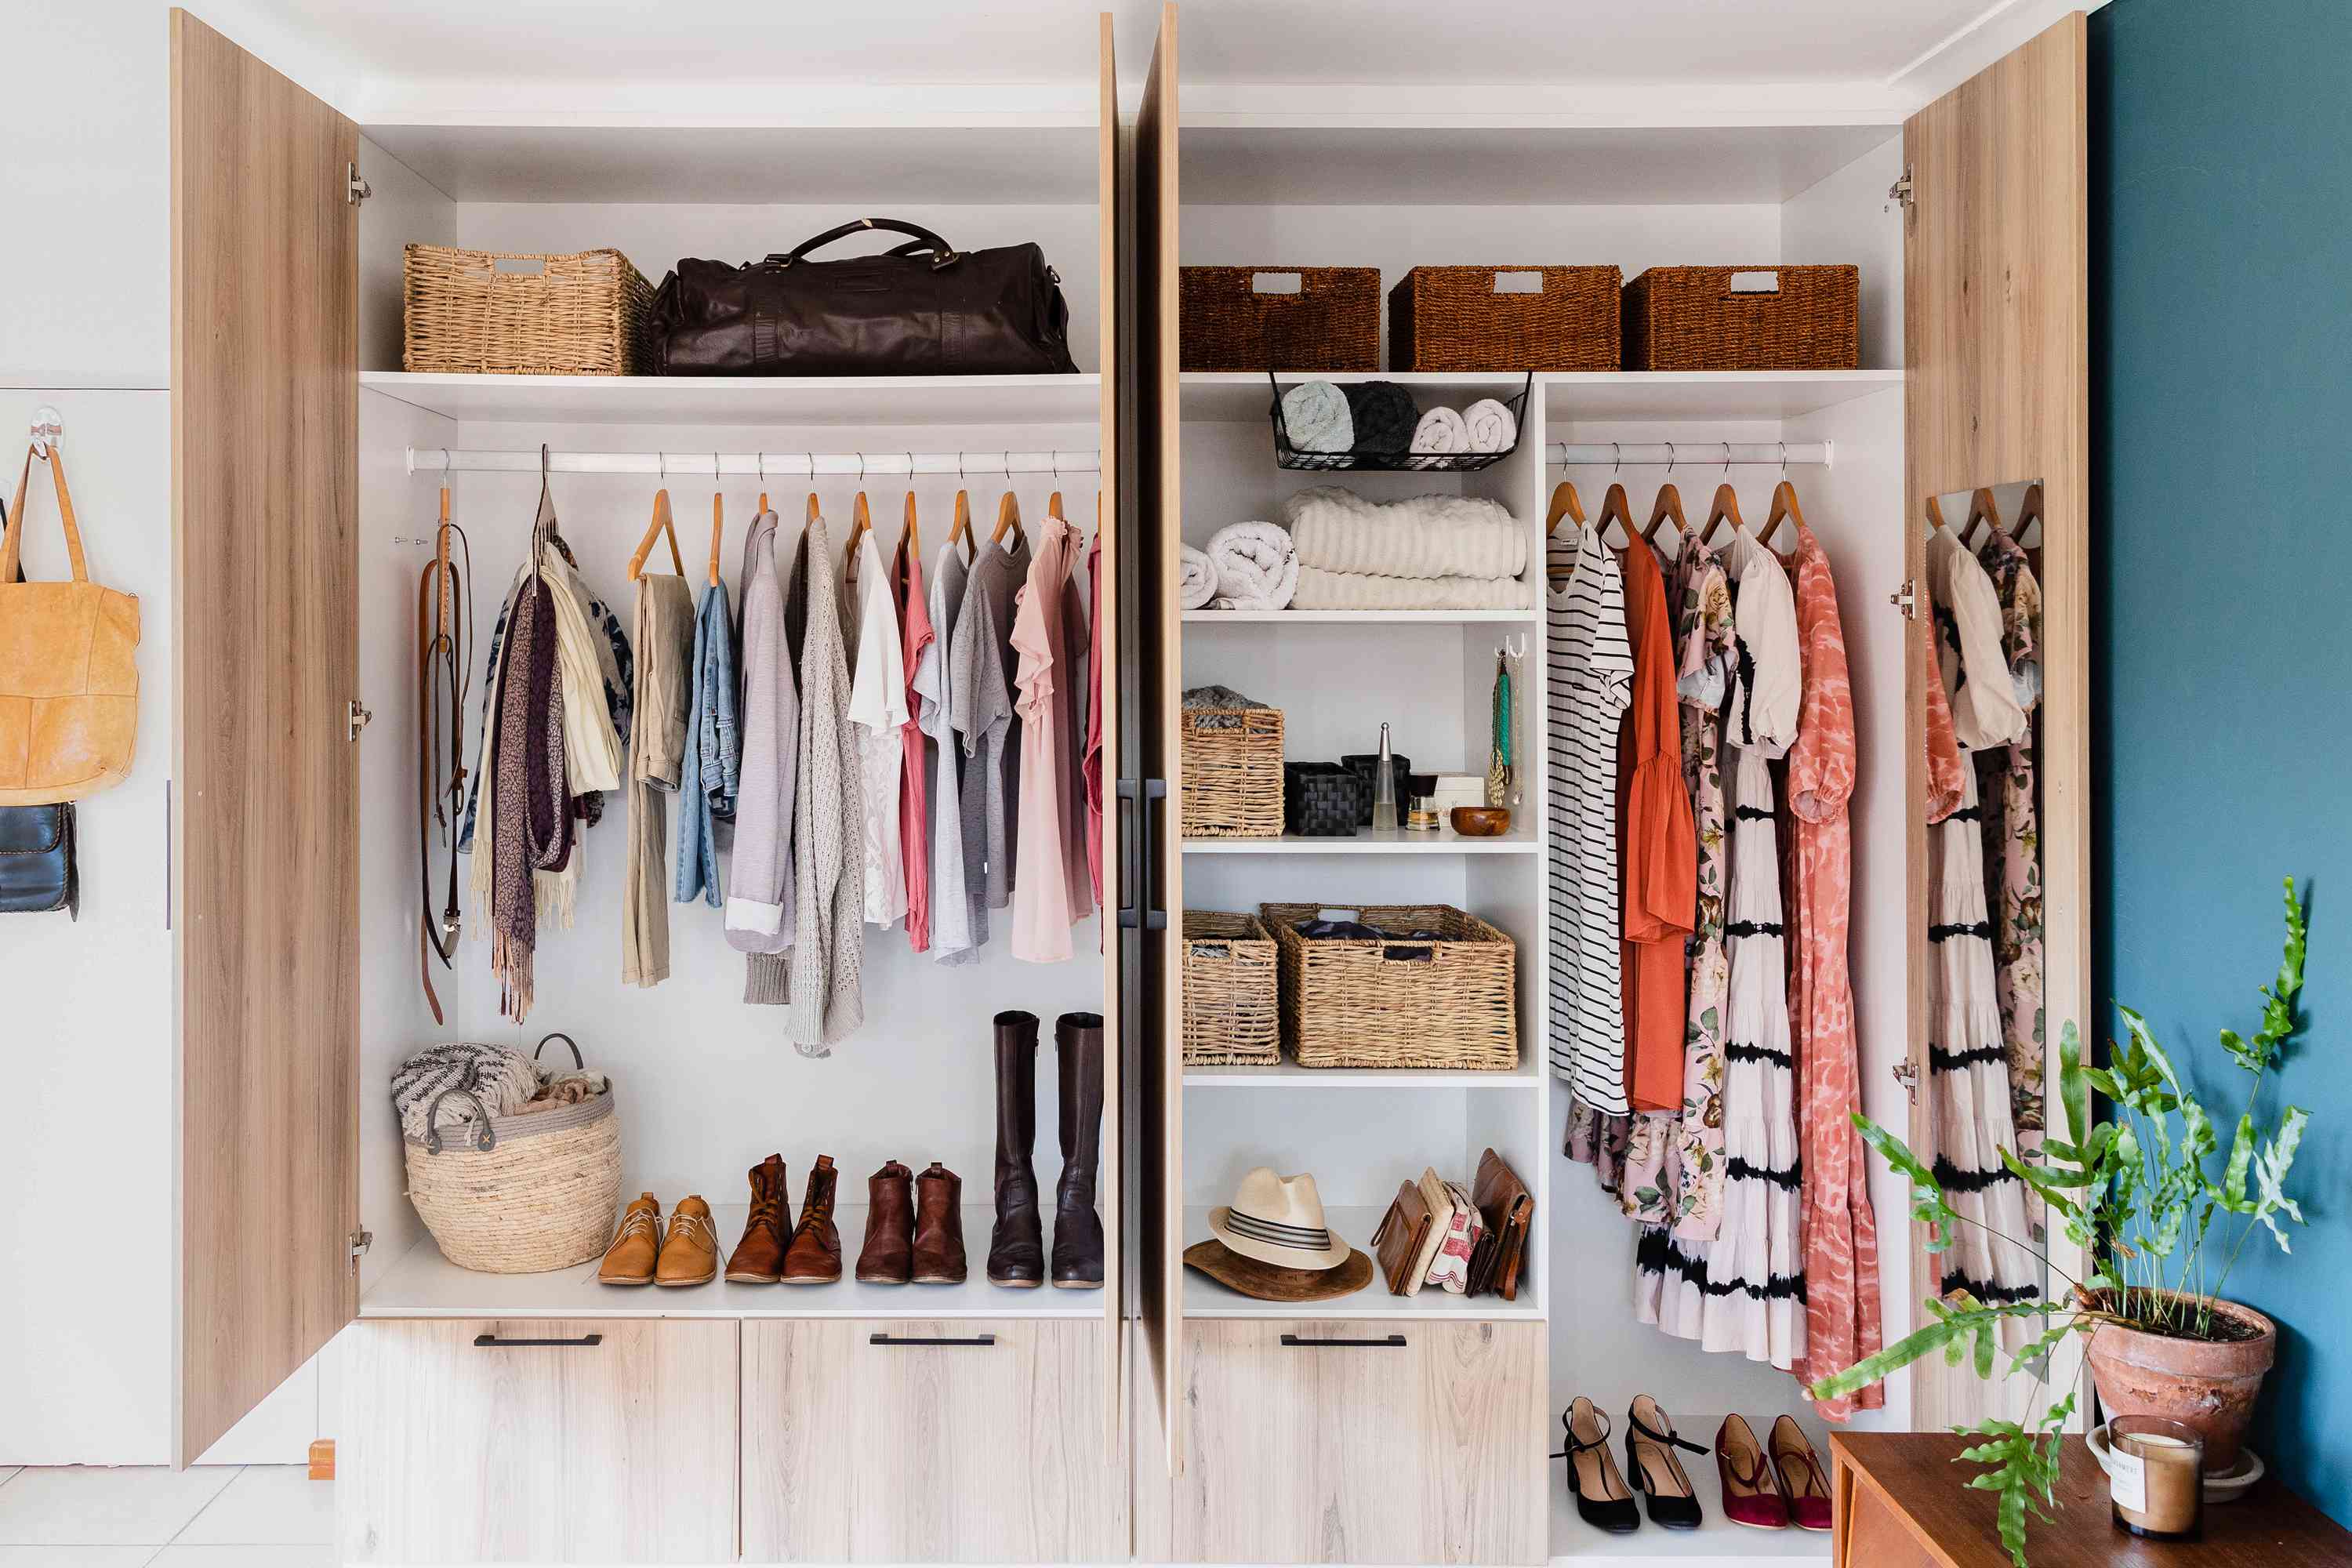 An organized closet with clothes hanging on racks and folded on shelves, as well as shoes, bags, and accessories neatly arranged in baskets and cubbies.